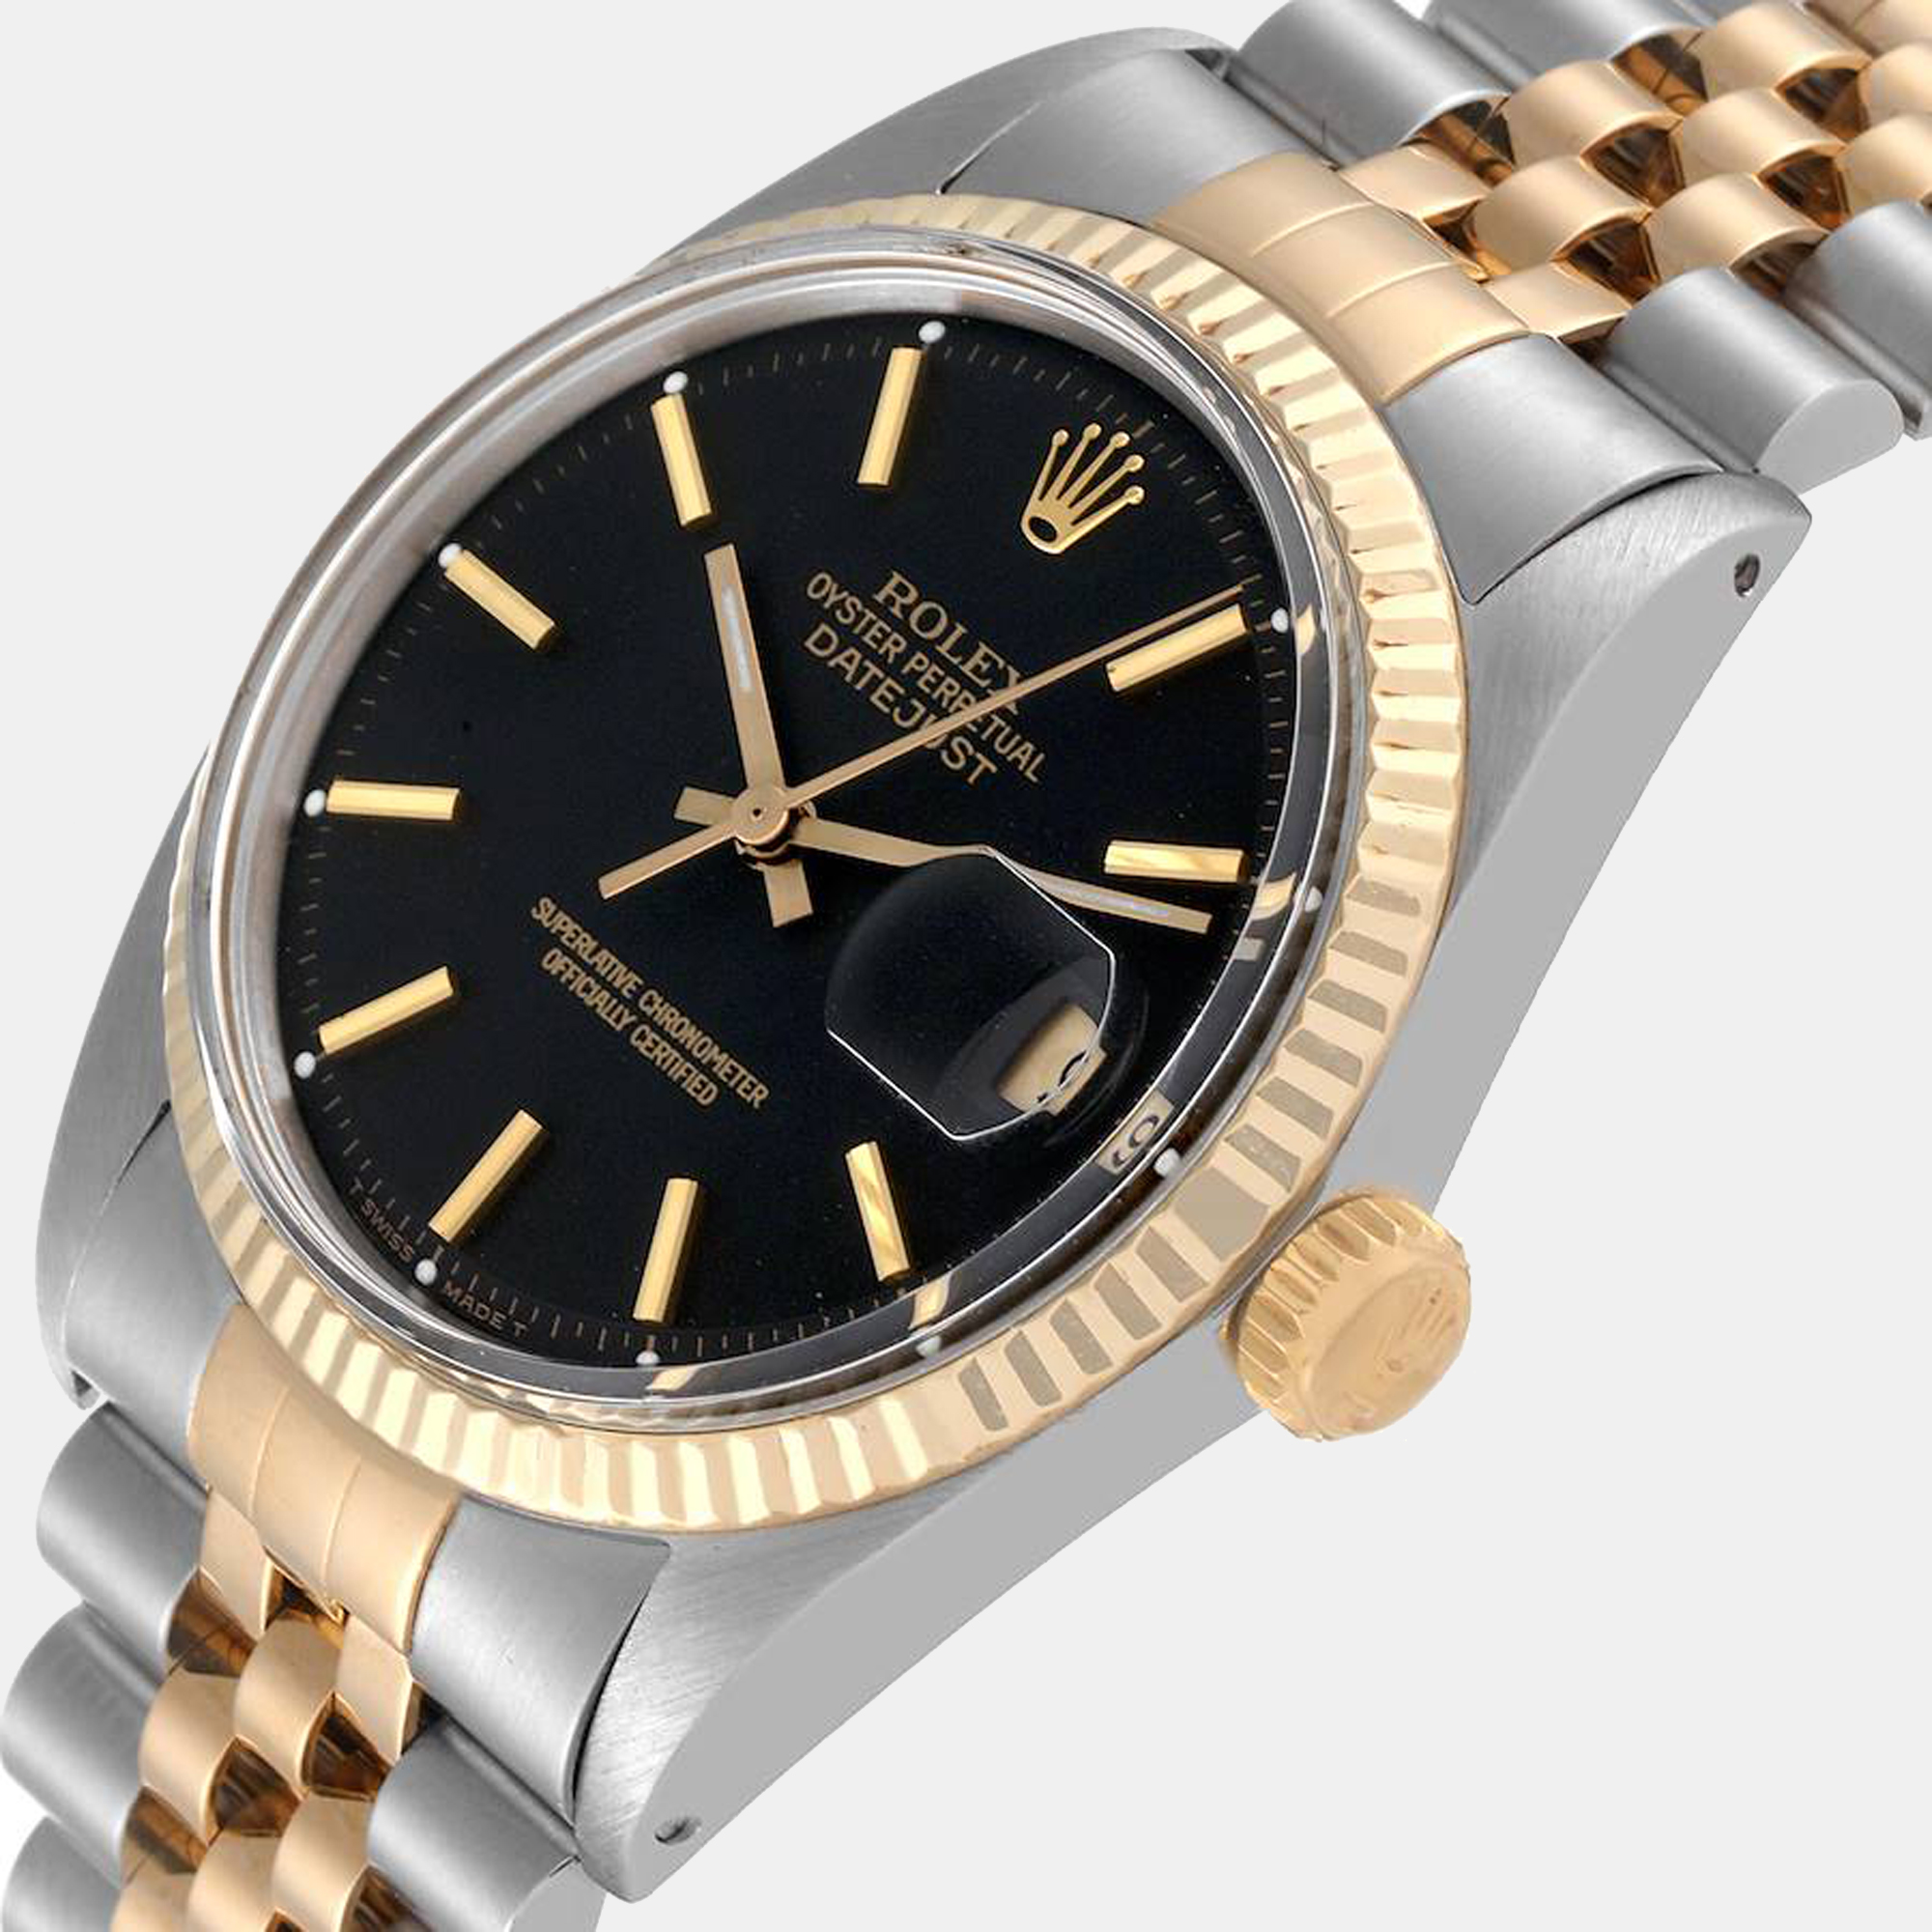 

Rolex Black 18K Yellow Gold And Stainless Steel Datejust 1601 Men's Wristwatch 36 mm